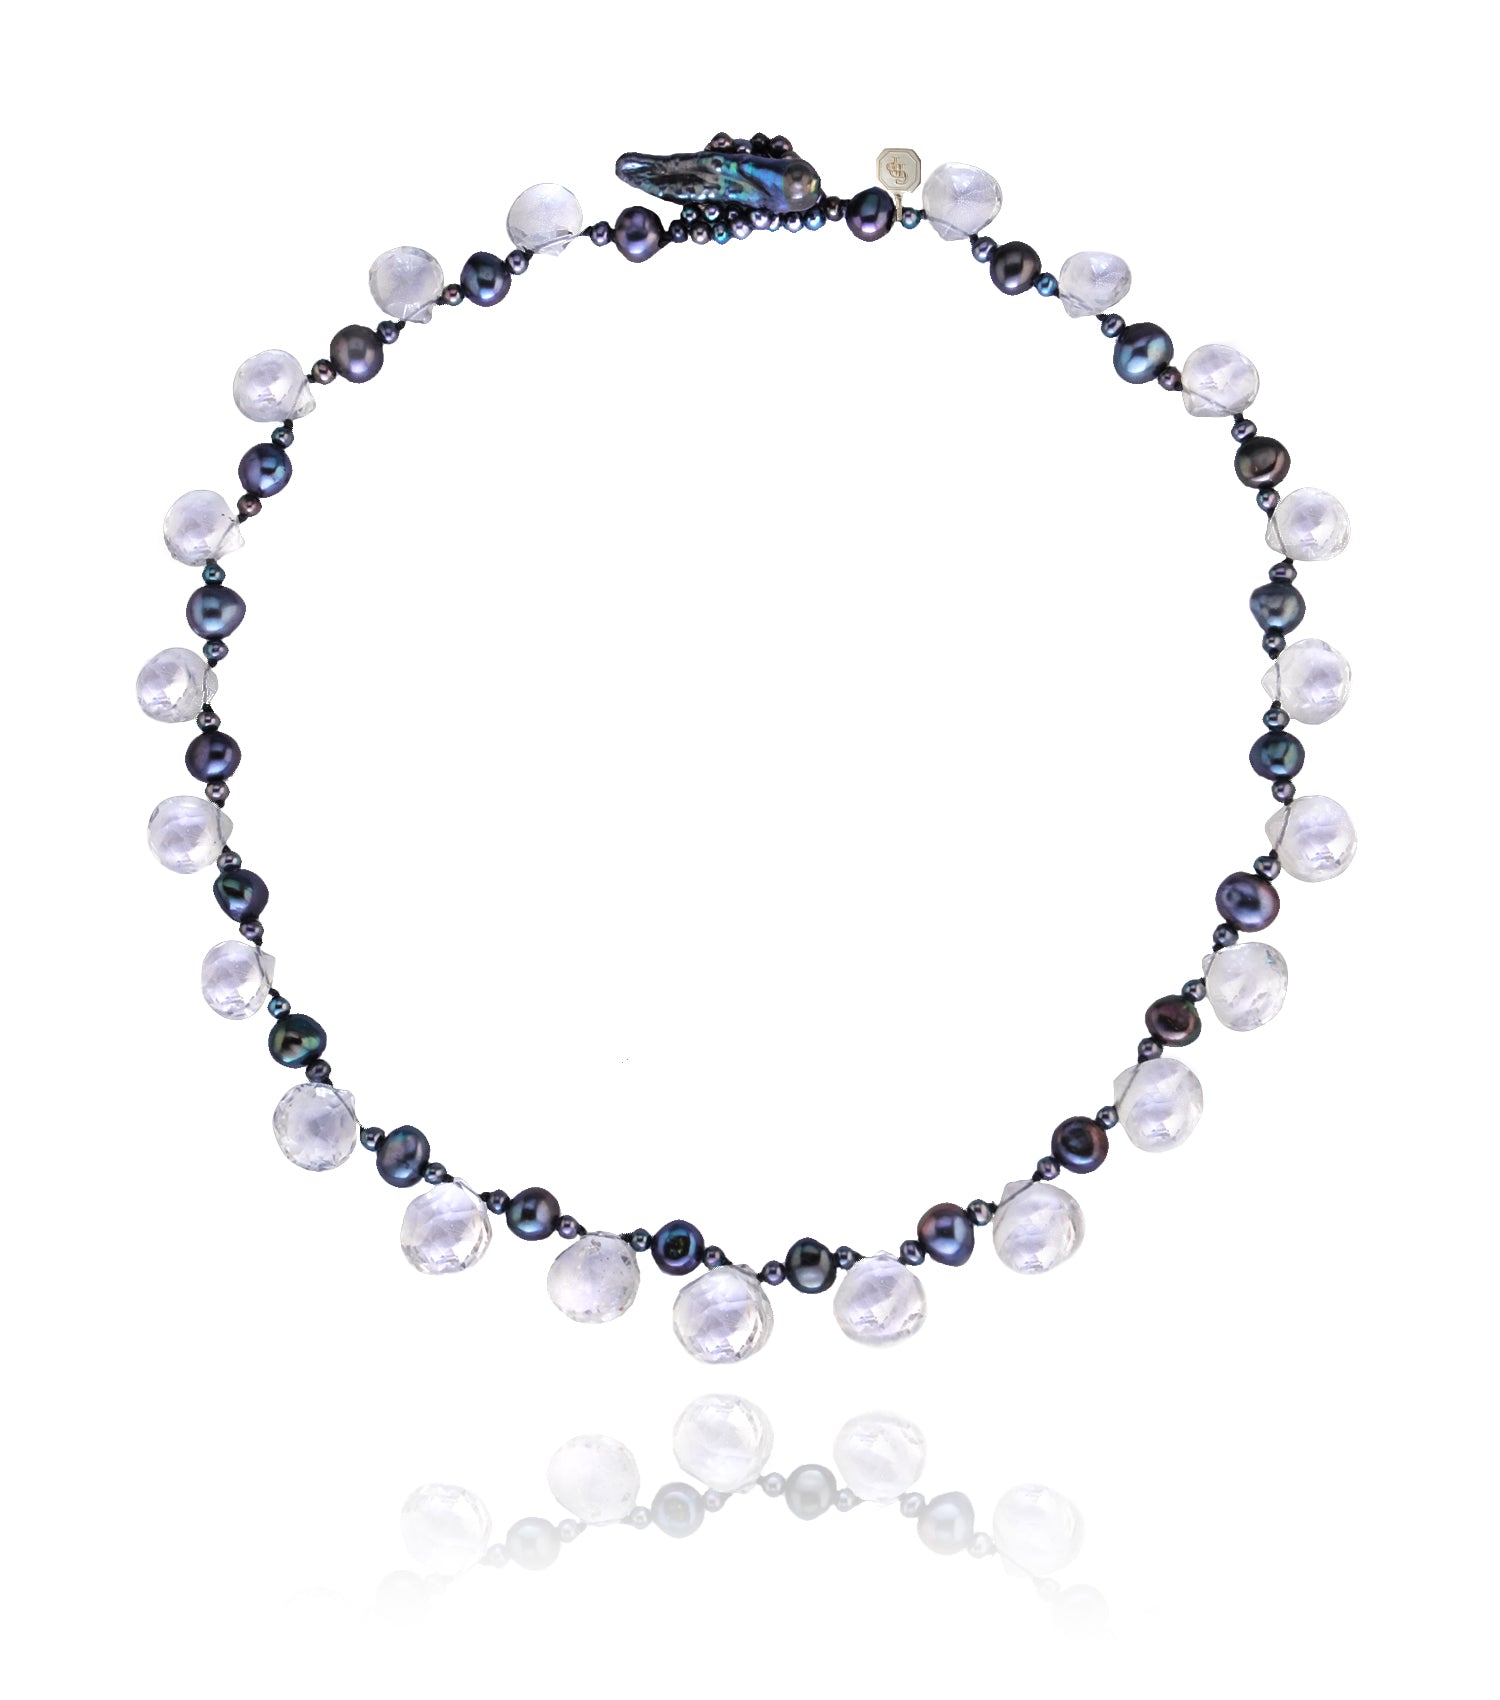 Faceted Rock Crystal Droplet Necklace With Black Pearl Spacers